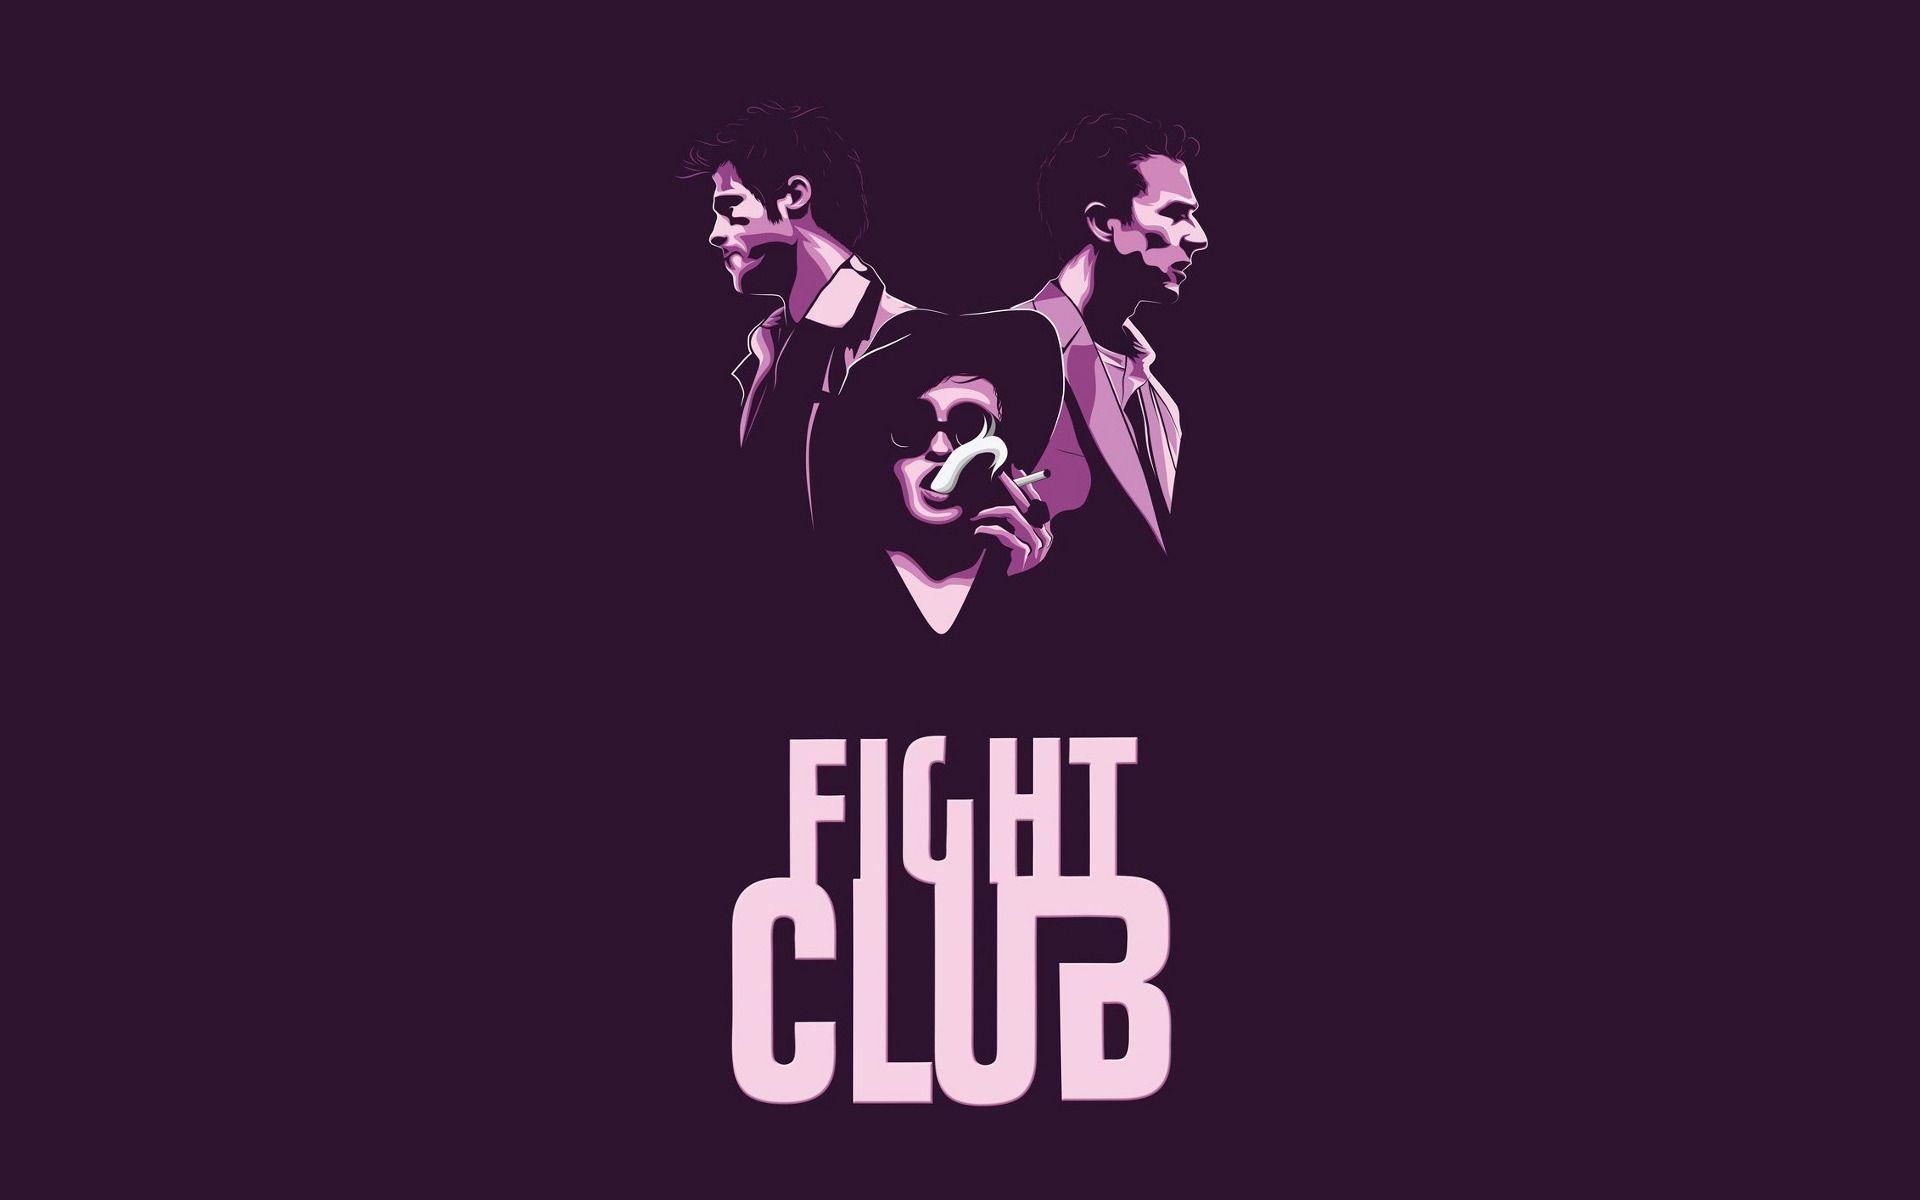 Wallpaper.wiki Fight Club Movie Background HD PIC WPD006883